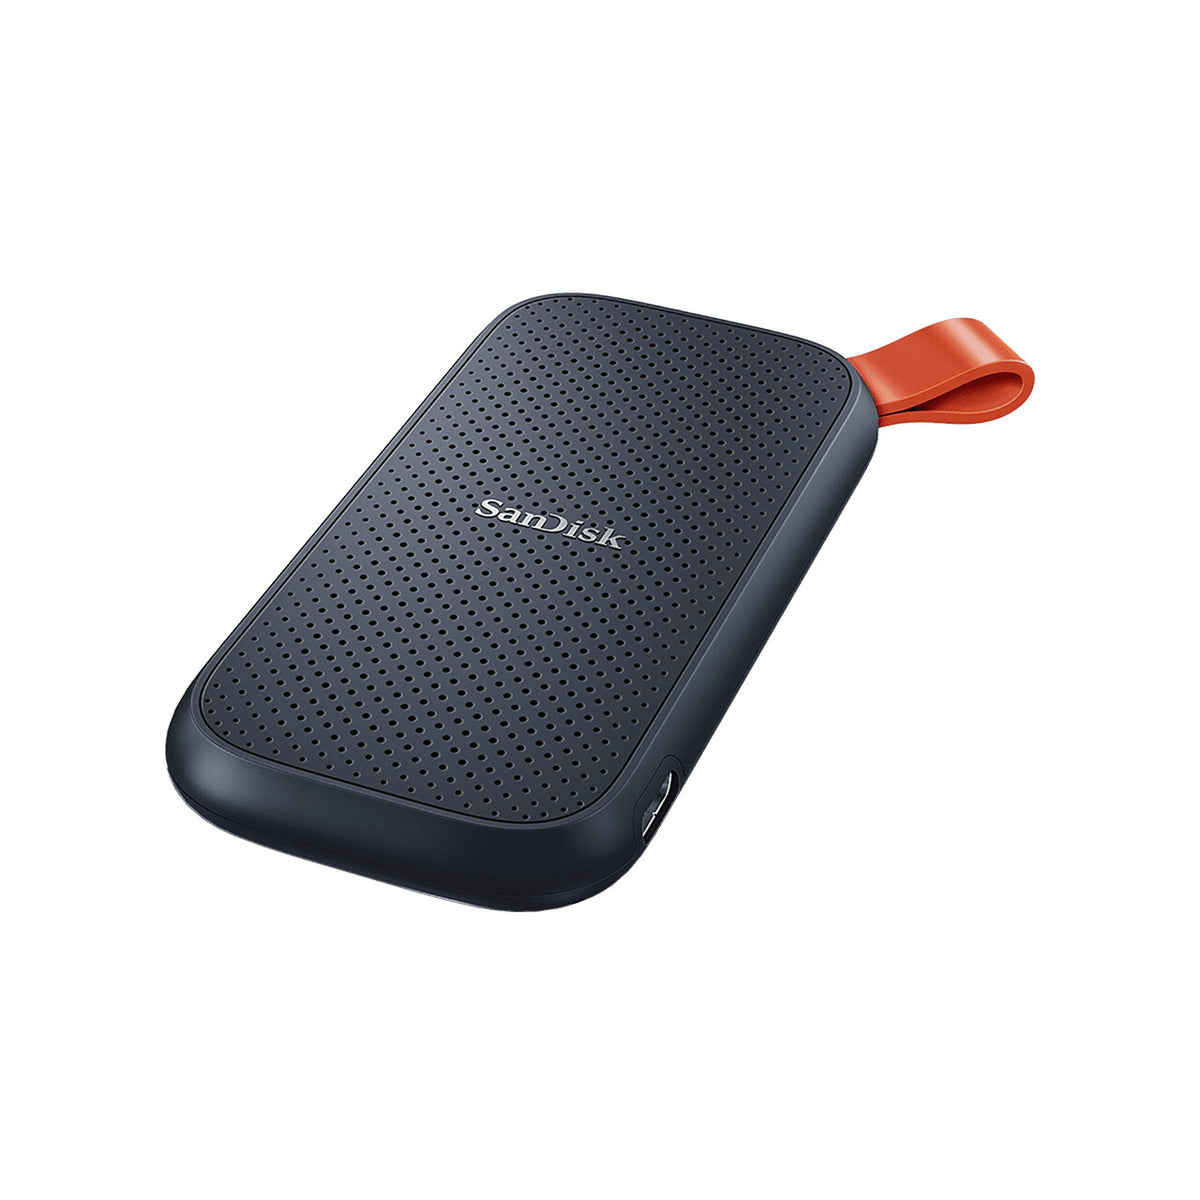 SanDisk Portable External solid state drive in Blue - 480 GB